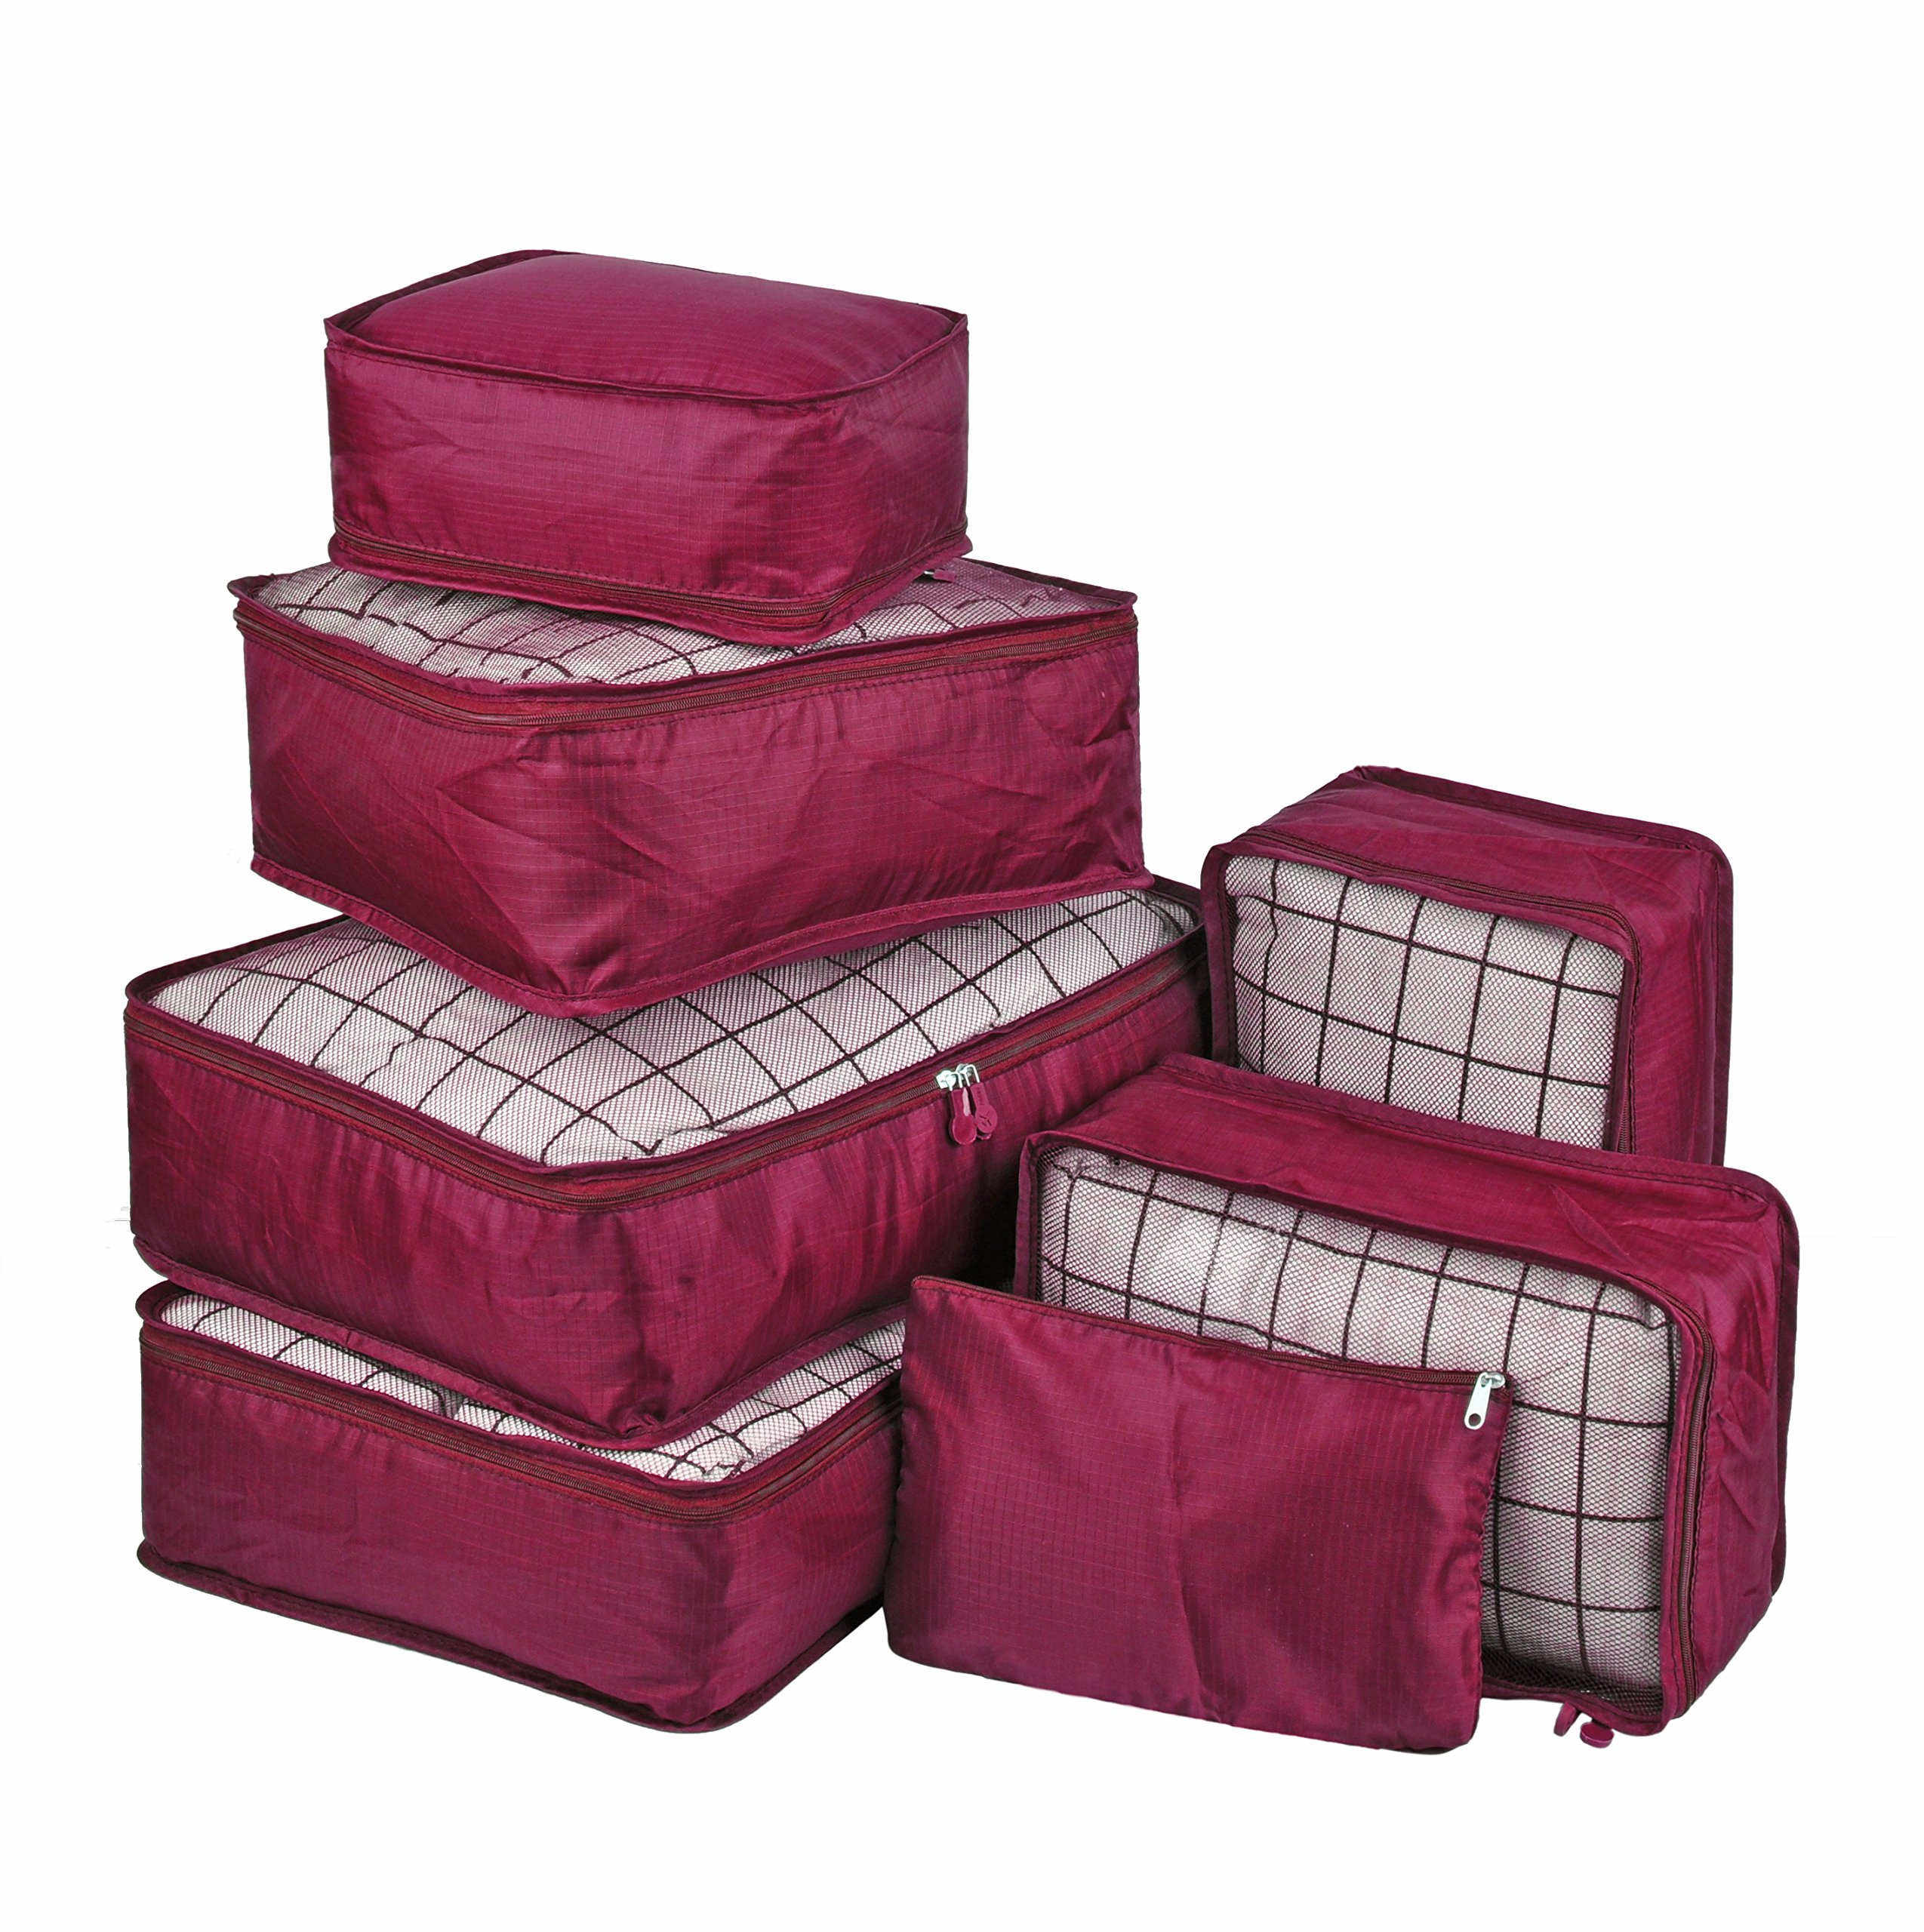 Travel Packing Organizers Cubes Bag Product Details